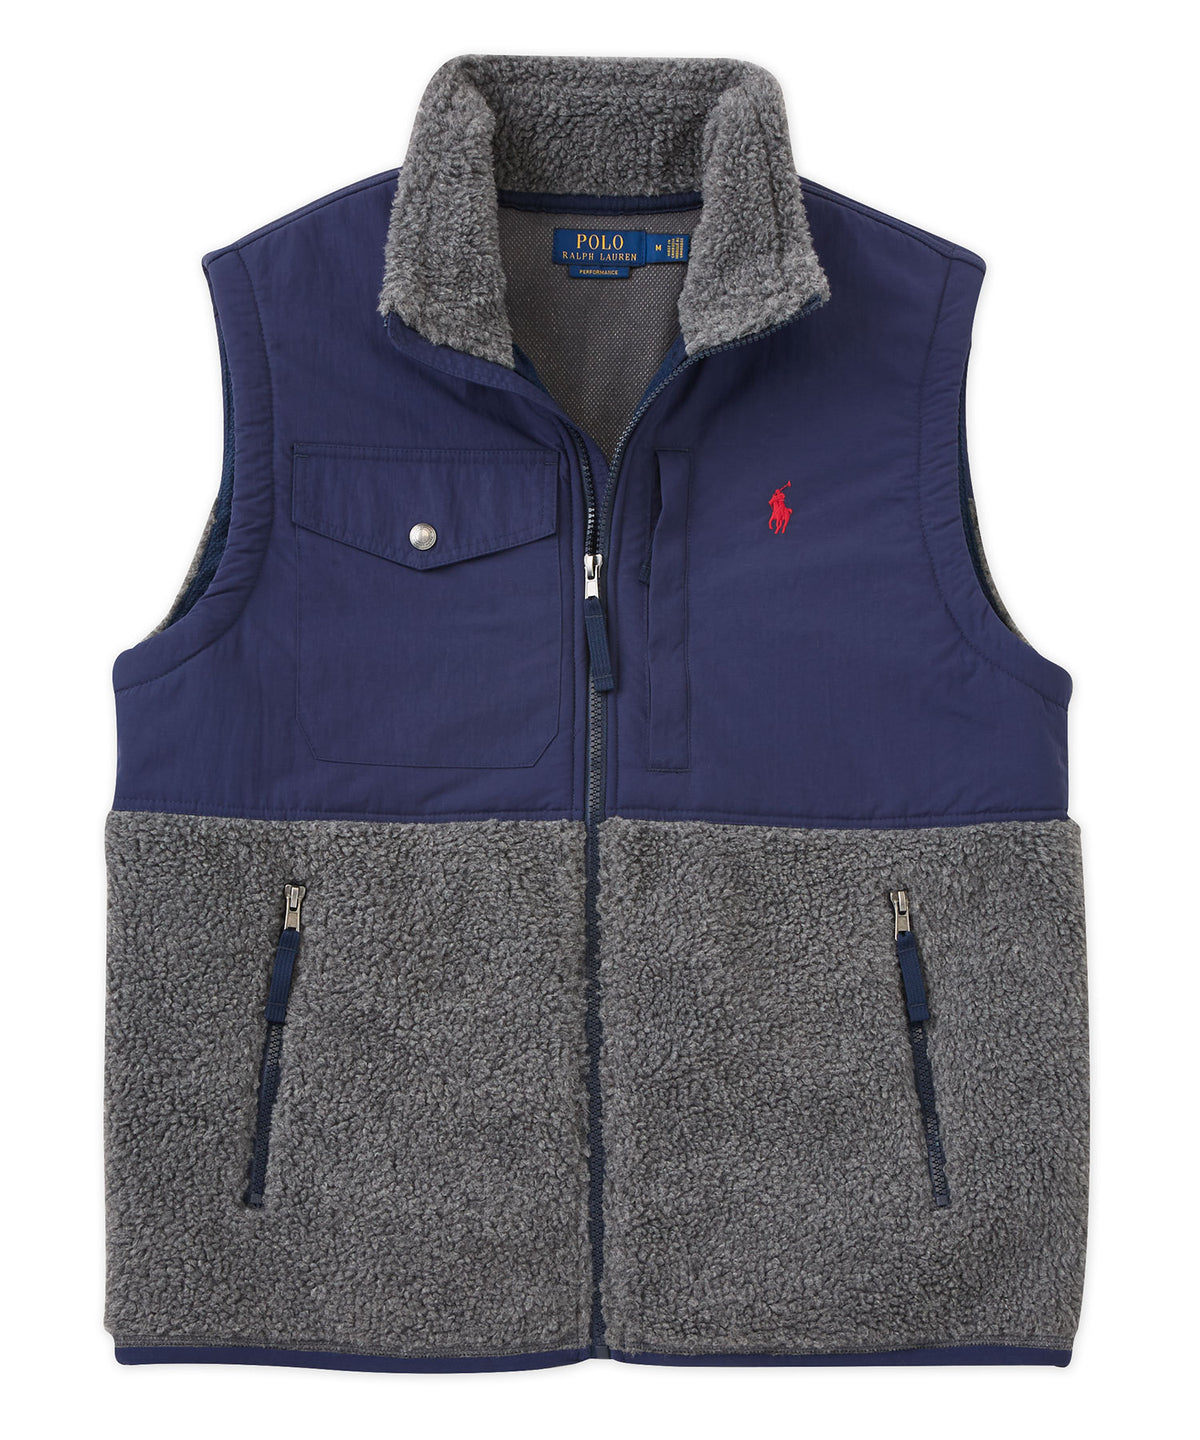 Polo Ralph Lauren Waistcoats and gilets for Men, Online Sale up to 50% off